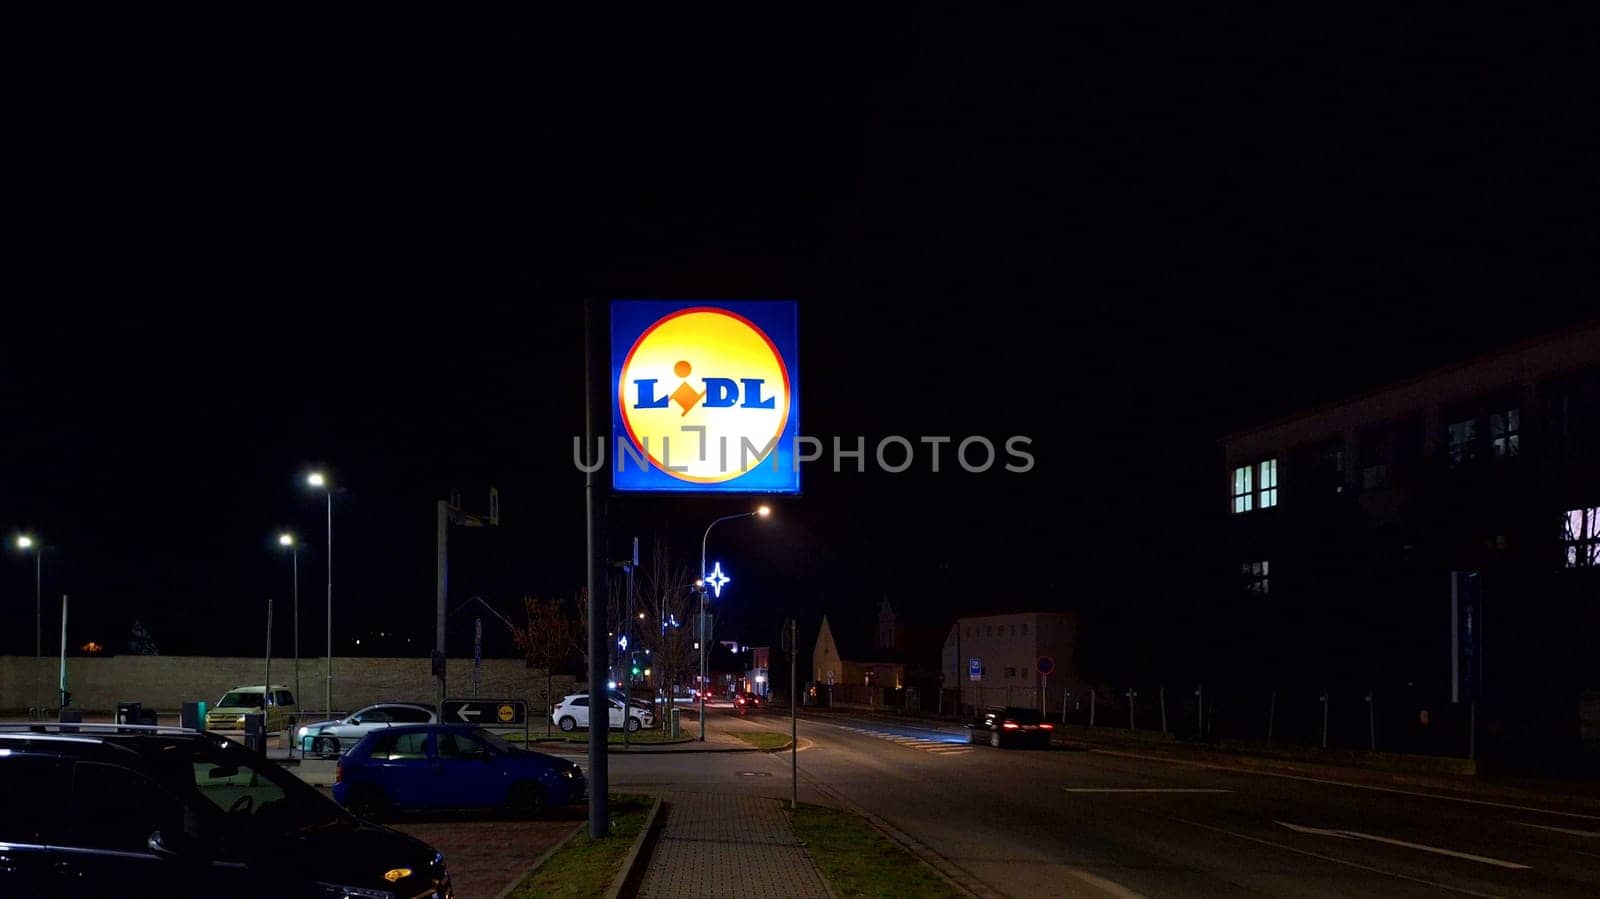 LIDL logo on hypermarket from German chain, part of Schwartz Gruppe which also owns Kaufland. Lidl is a German international discount retailer chain that operates over 12,000 stores, present in every member state of the European Union, Serbia, Switzerland, the United Kingdom and the United States. by roman_nerud